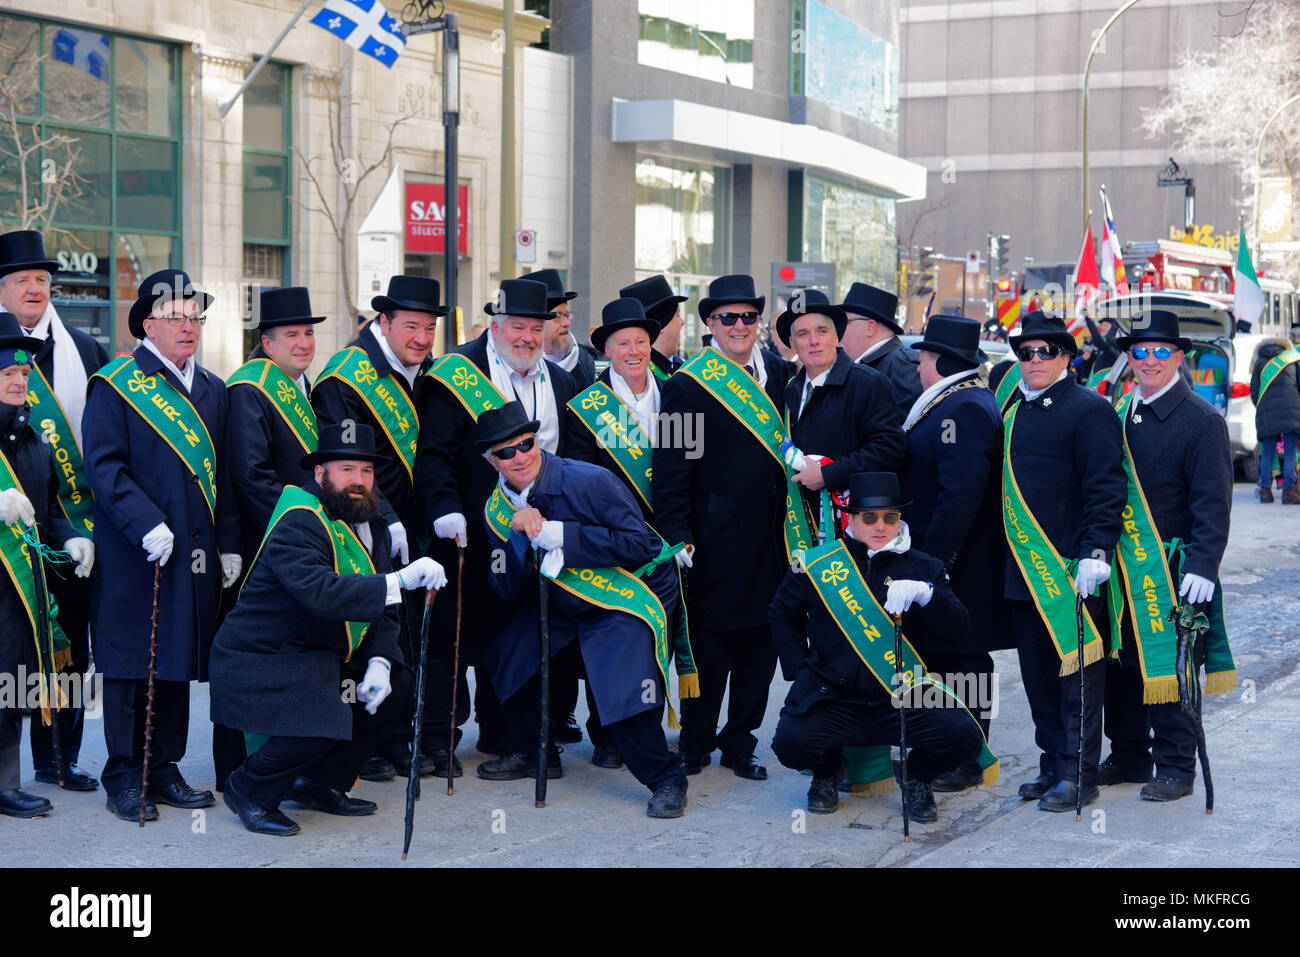 members of Erin Sports Association pose for their photo in the Montreal St Patricks Day Parade Stock Photo